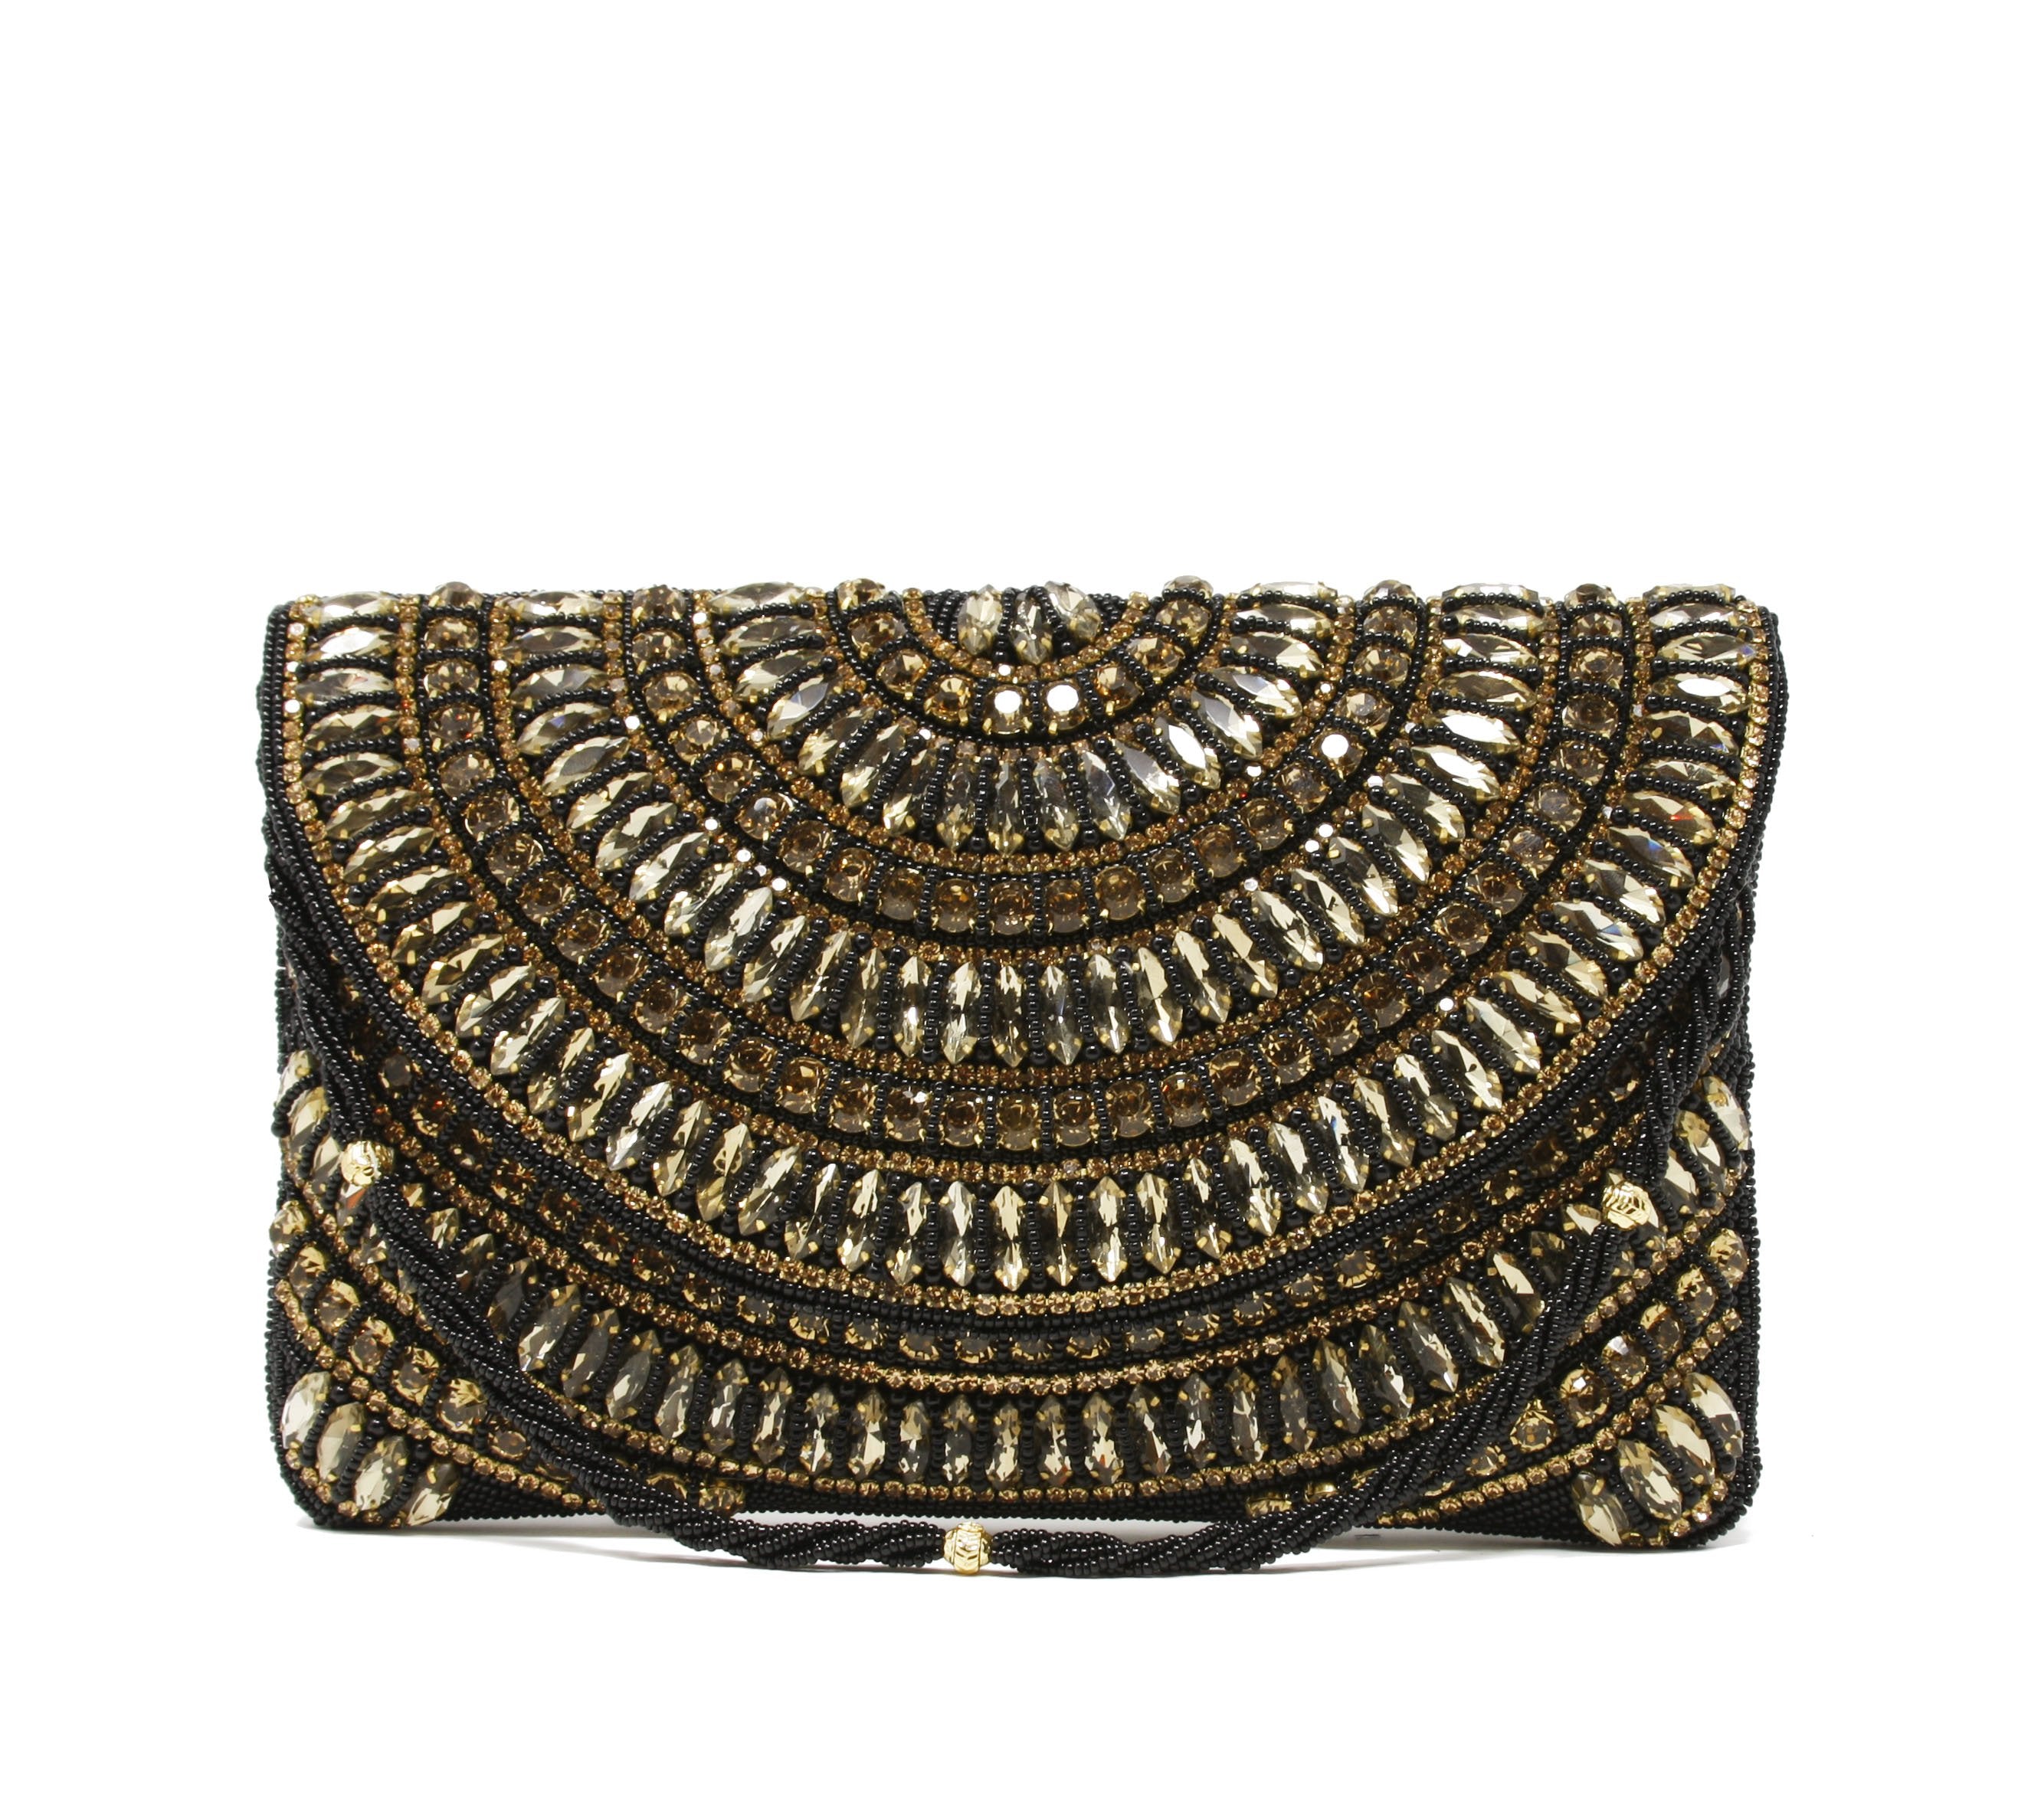  Sparkly gold & black clutch  evening bag. Covered with beads & crystal with black twisted beaded wristlet.